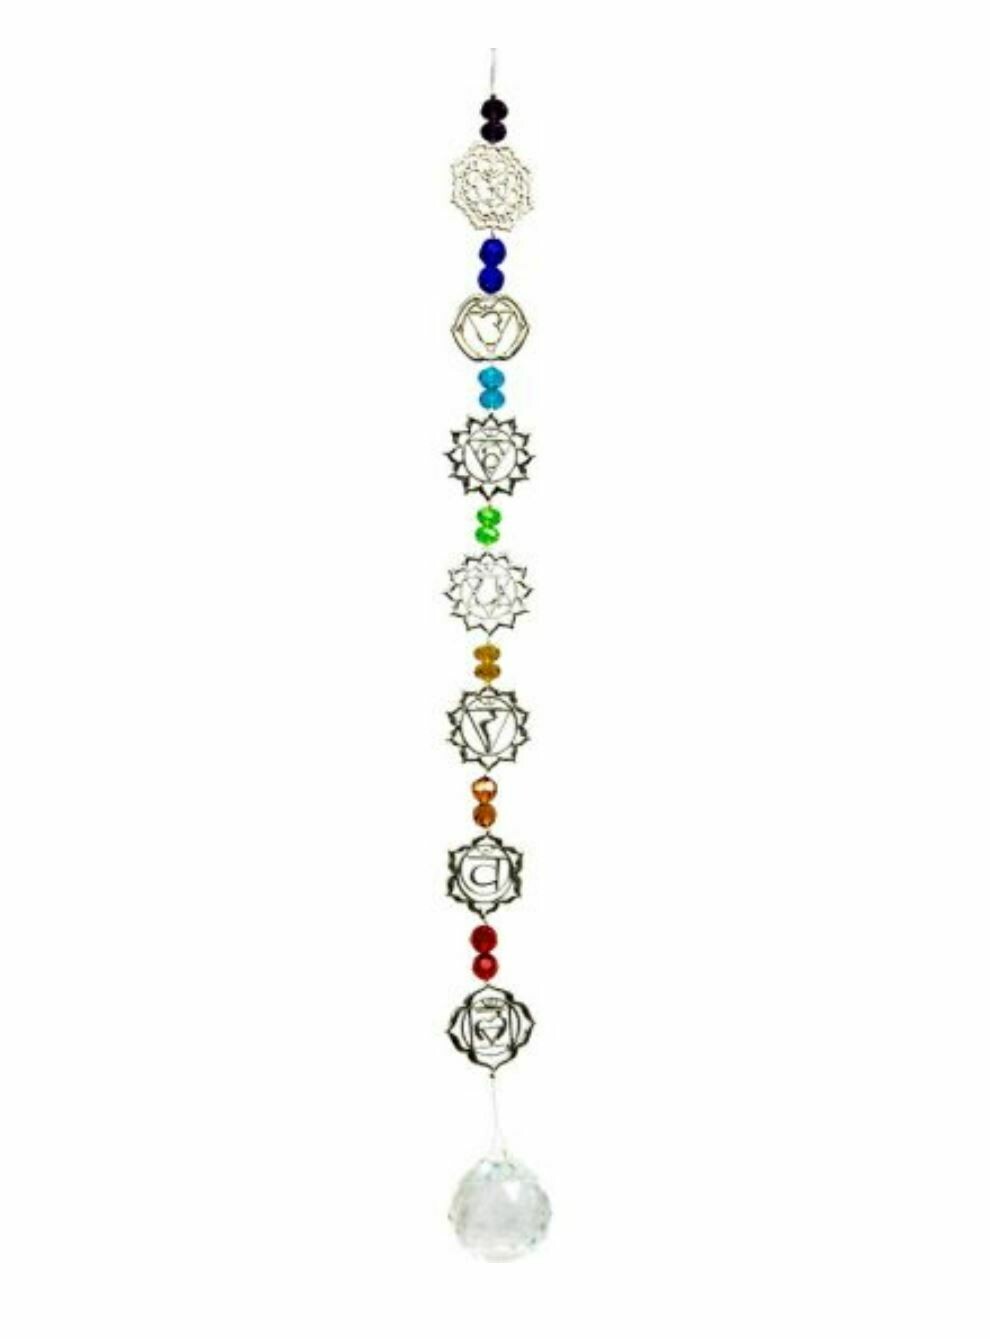 7 Chakra Hanging Crystal With Beads